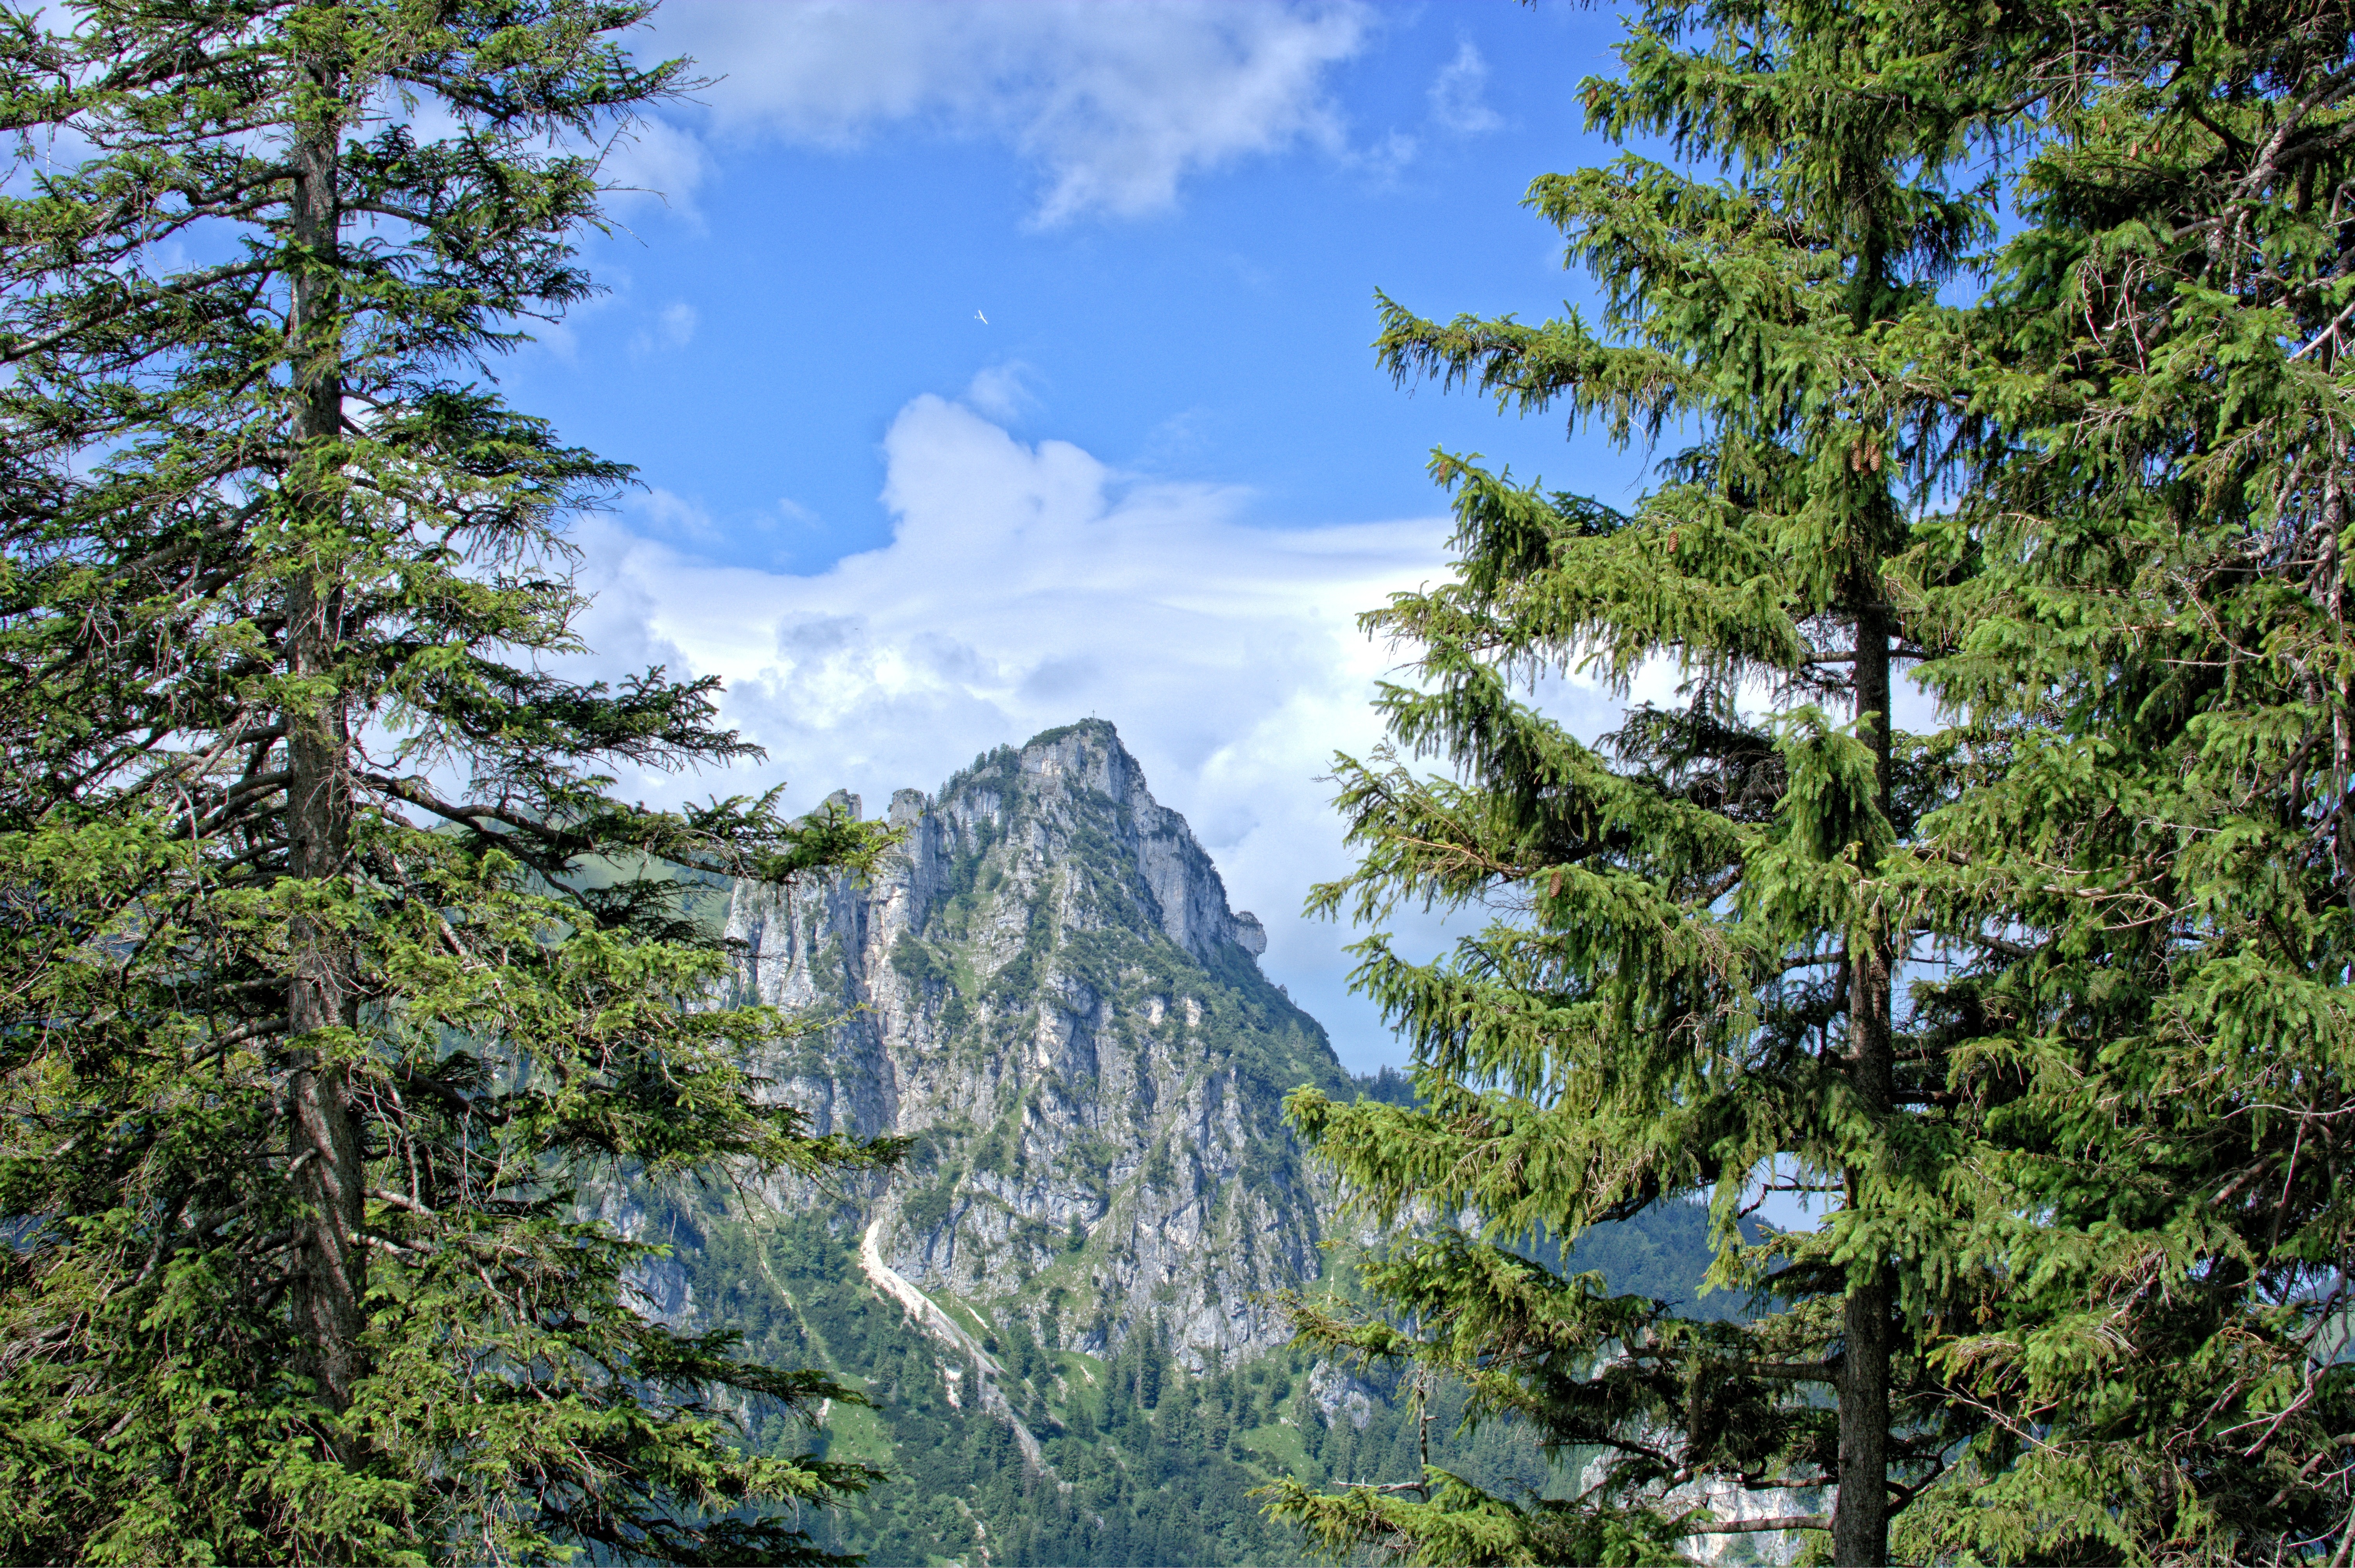 photo of rocky mountain surrounded with trees